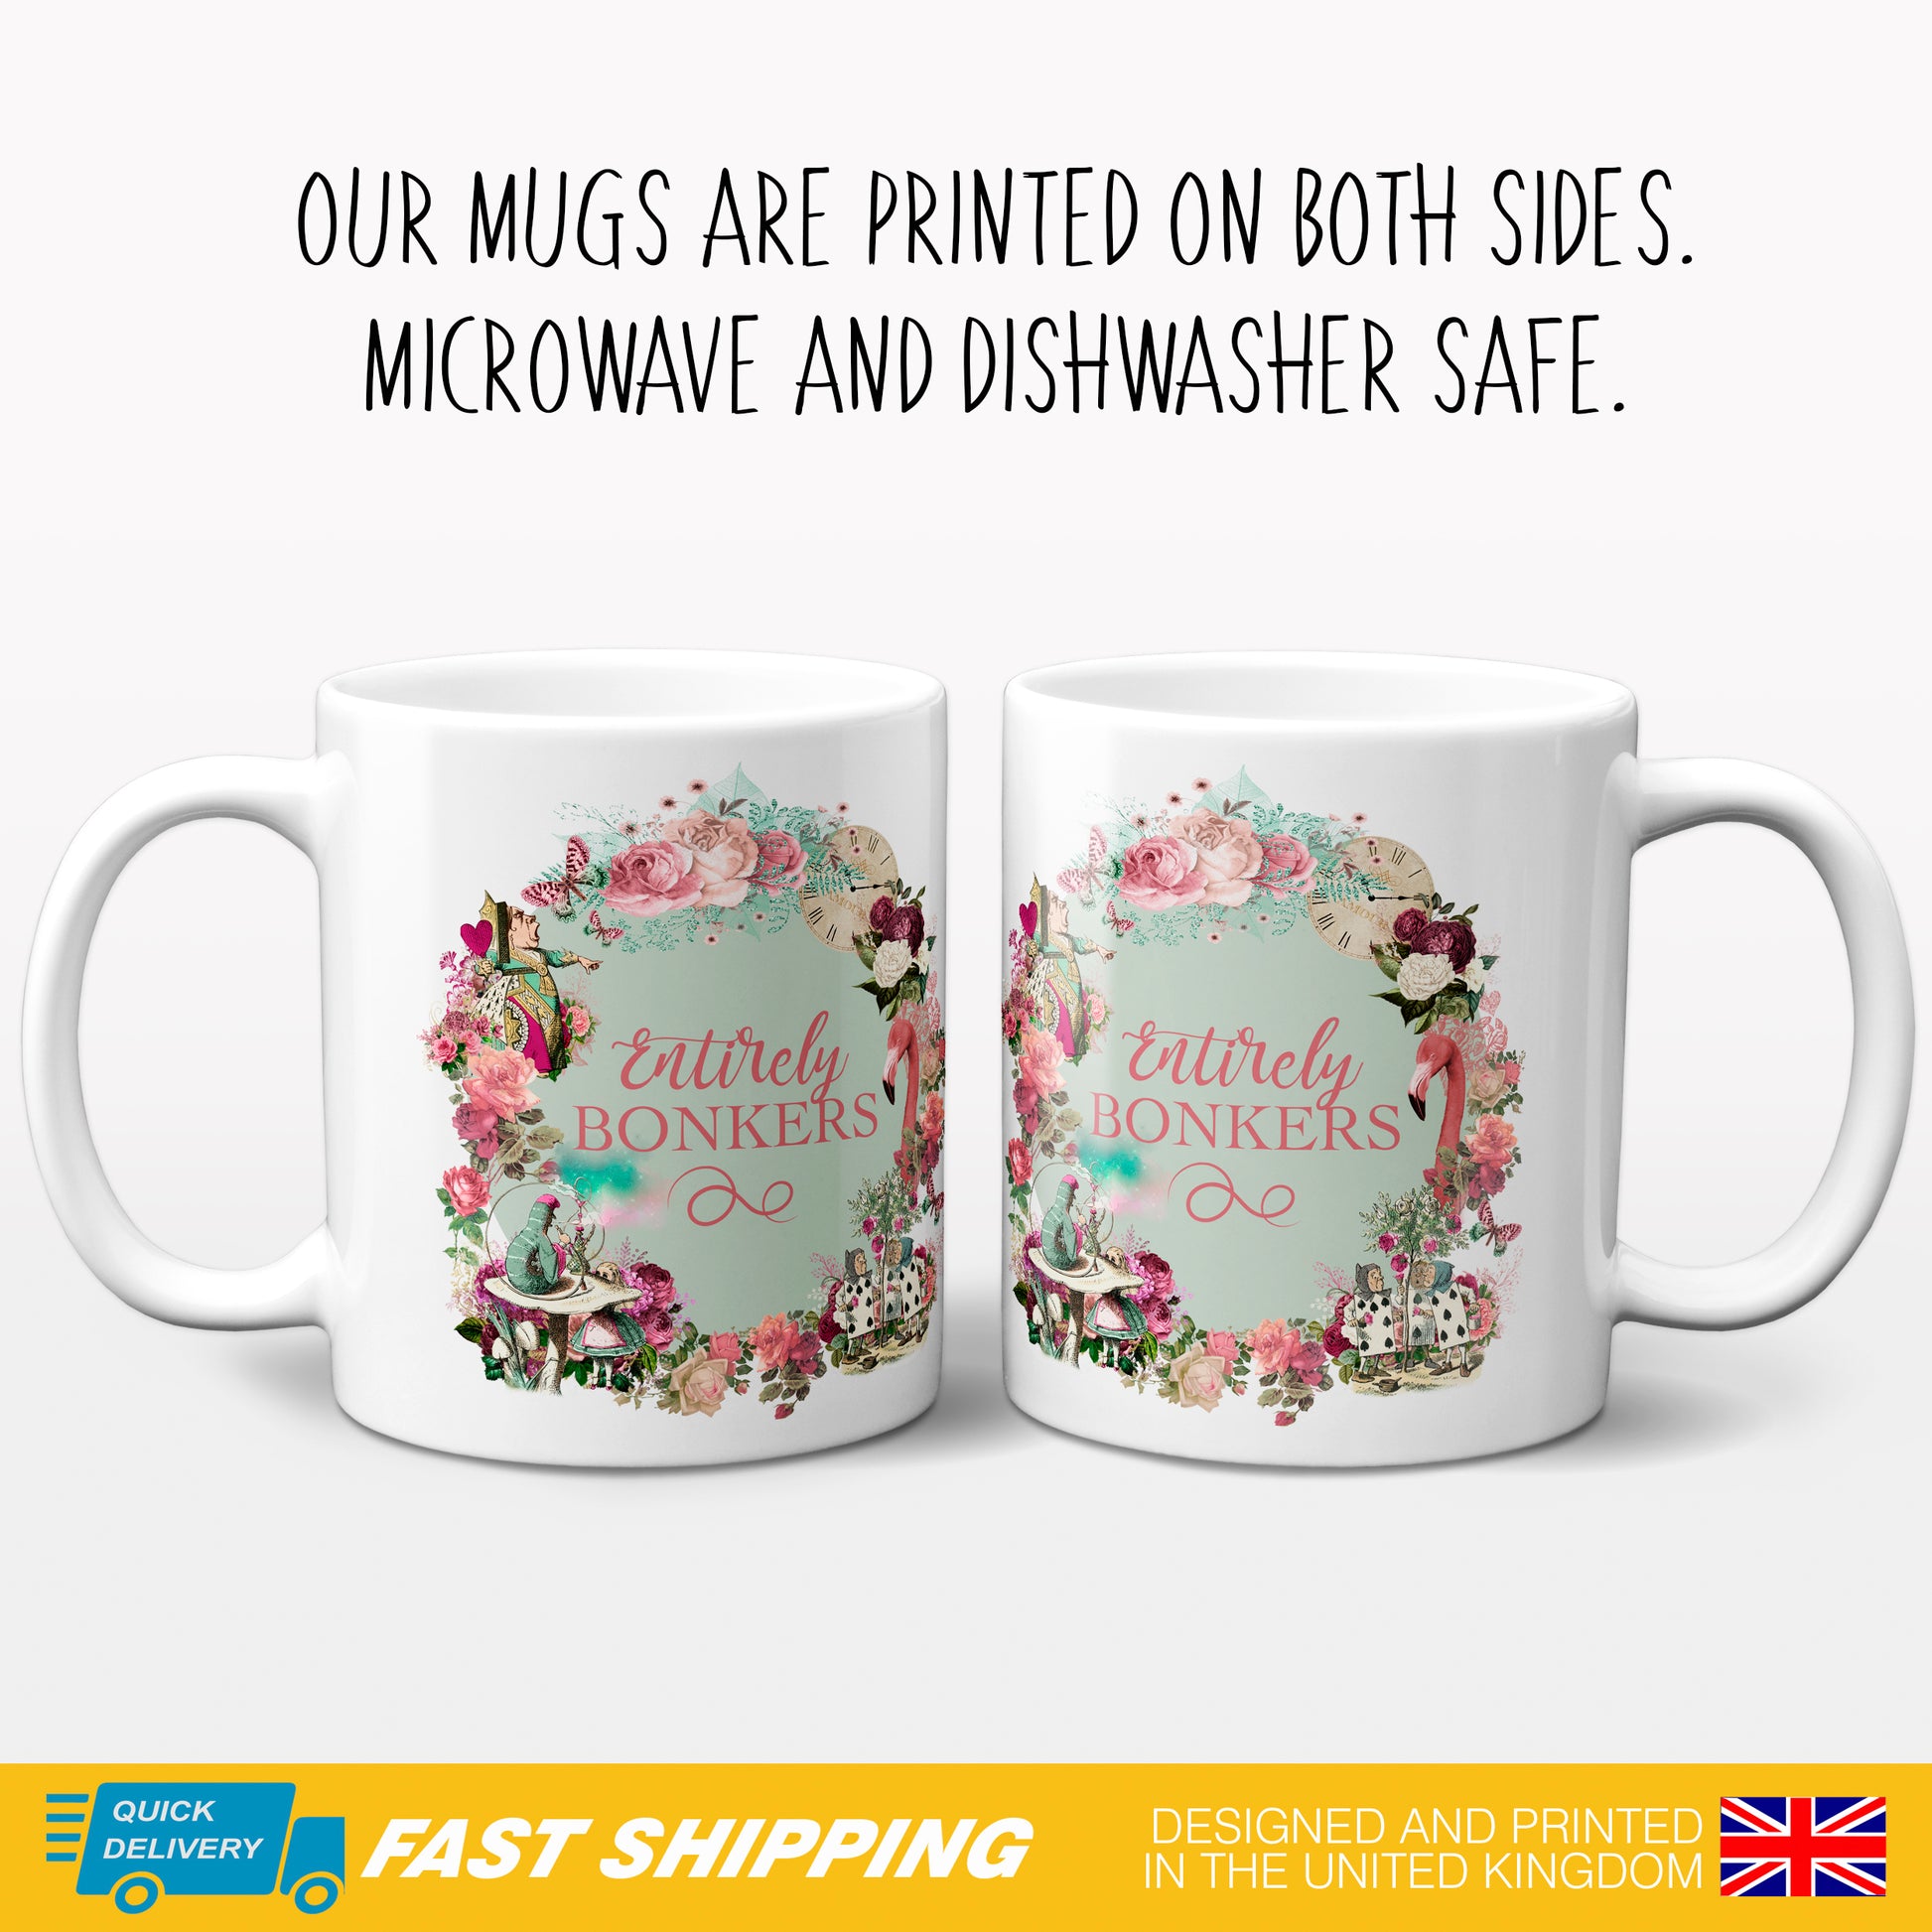 Alice in Wonderland Mug Gift picturing a montage of flowers and wonderland characters including the queen of hearts, Alice and the Caterpillar with the phrase 'Entirely Bonkers' showing 2 mugs with front and back artwork